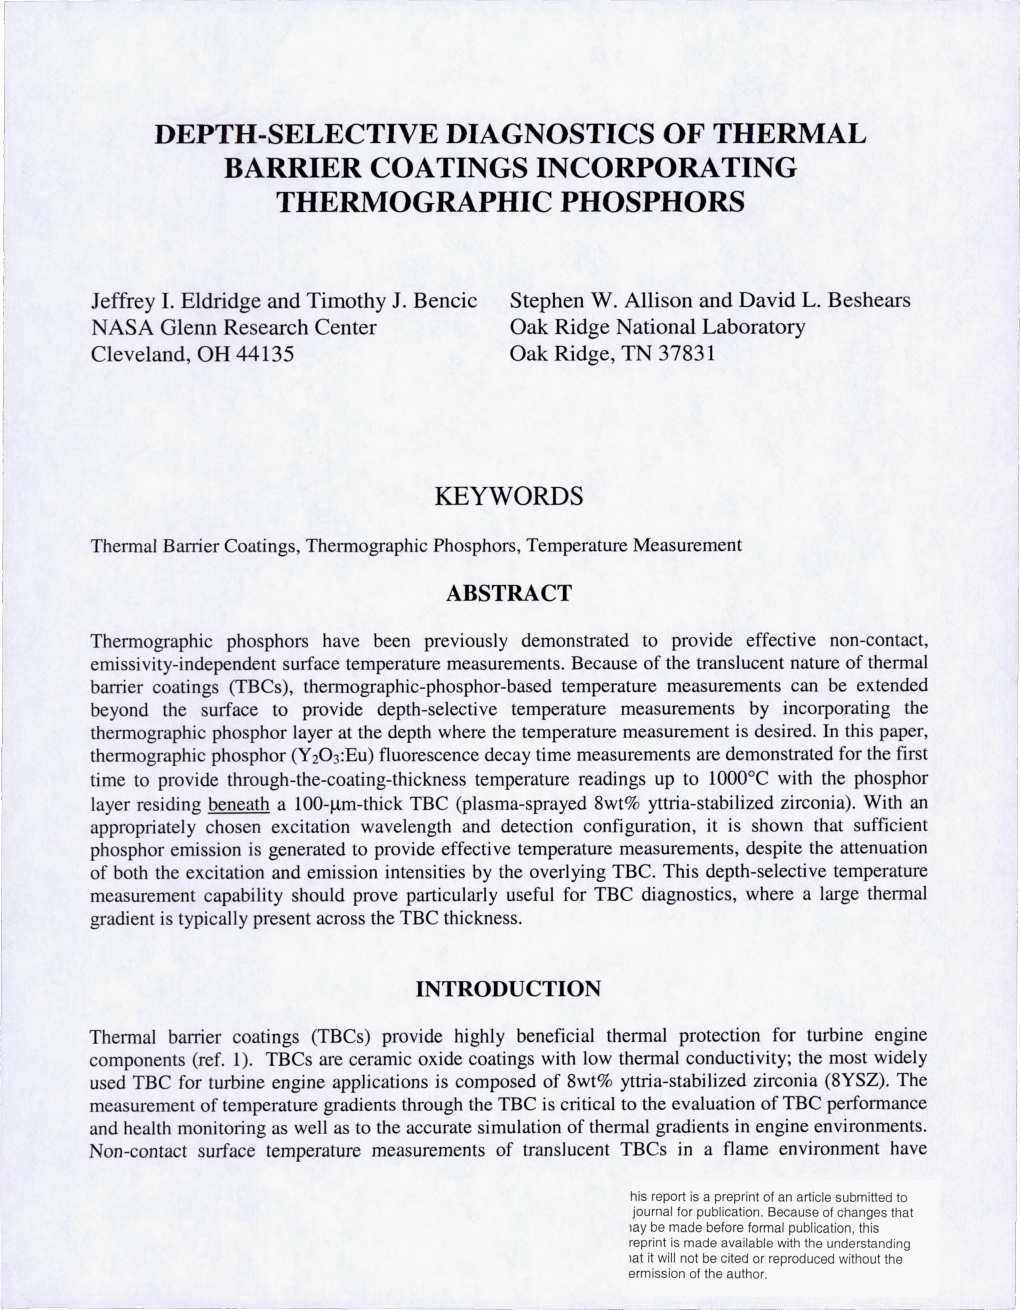 Depth-Selective Diagnostics of Thermal Barrier Coatings Incorporating Thermographic Phosphors